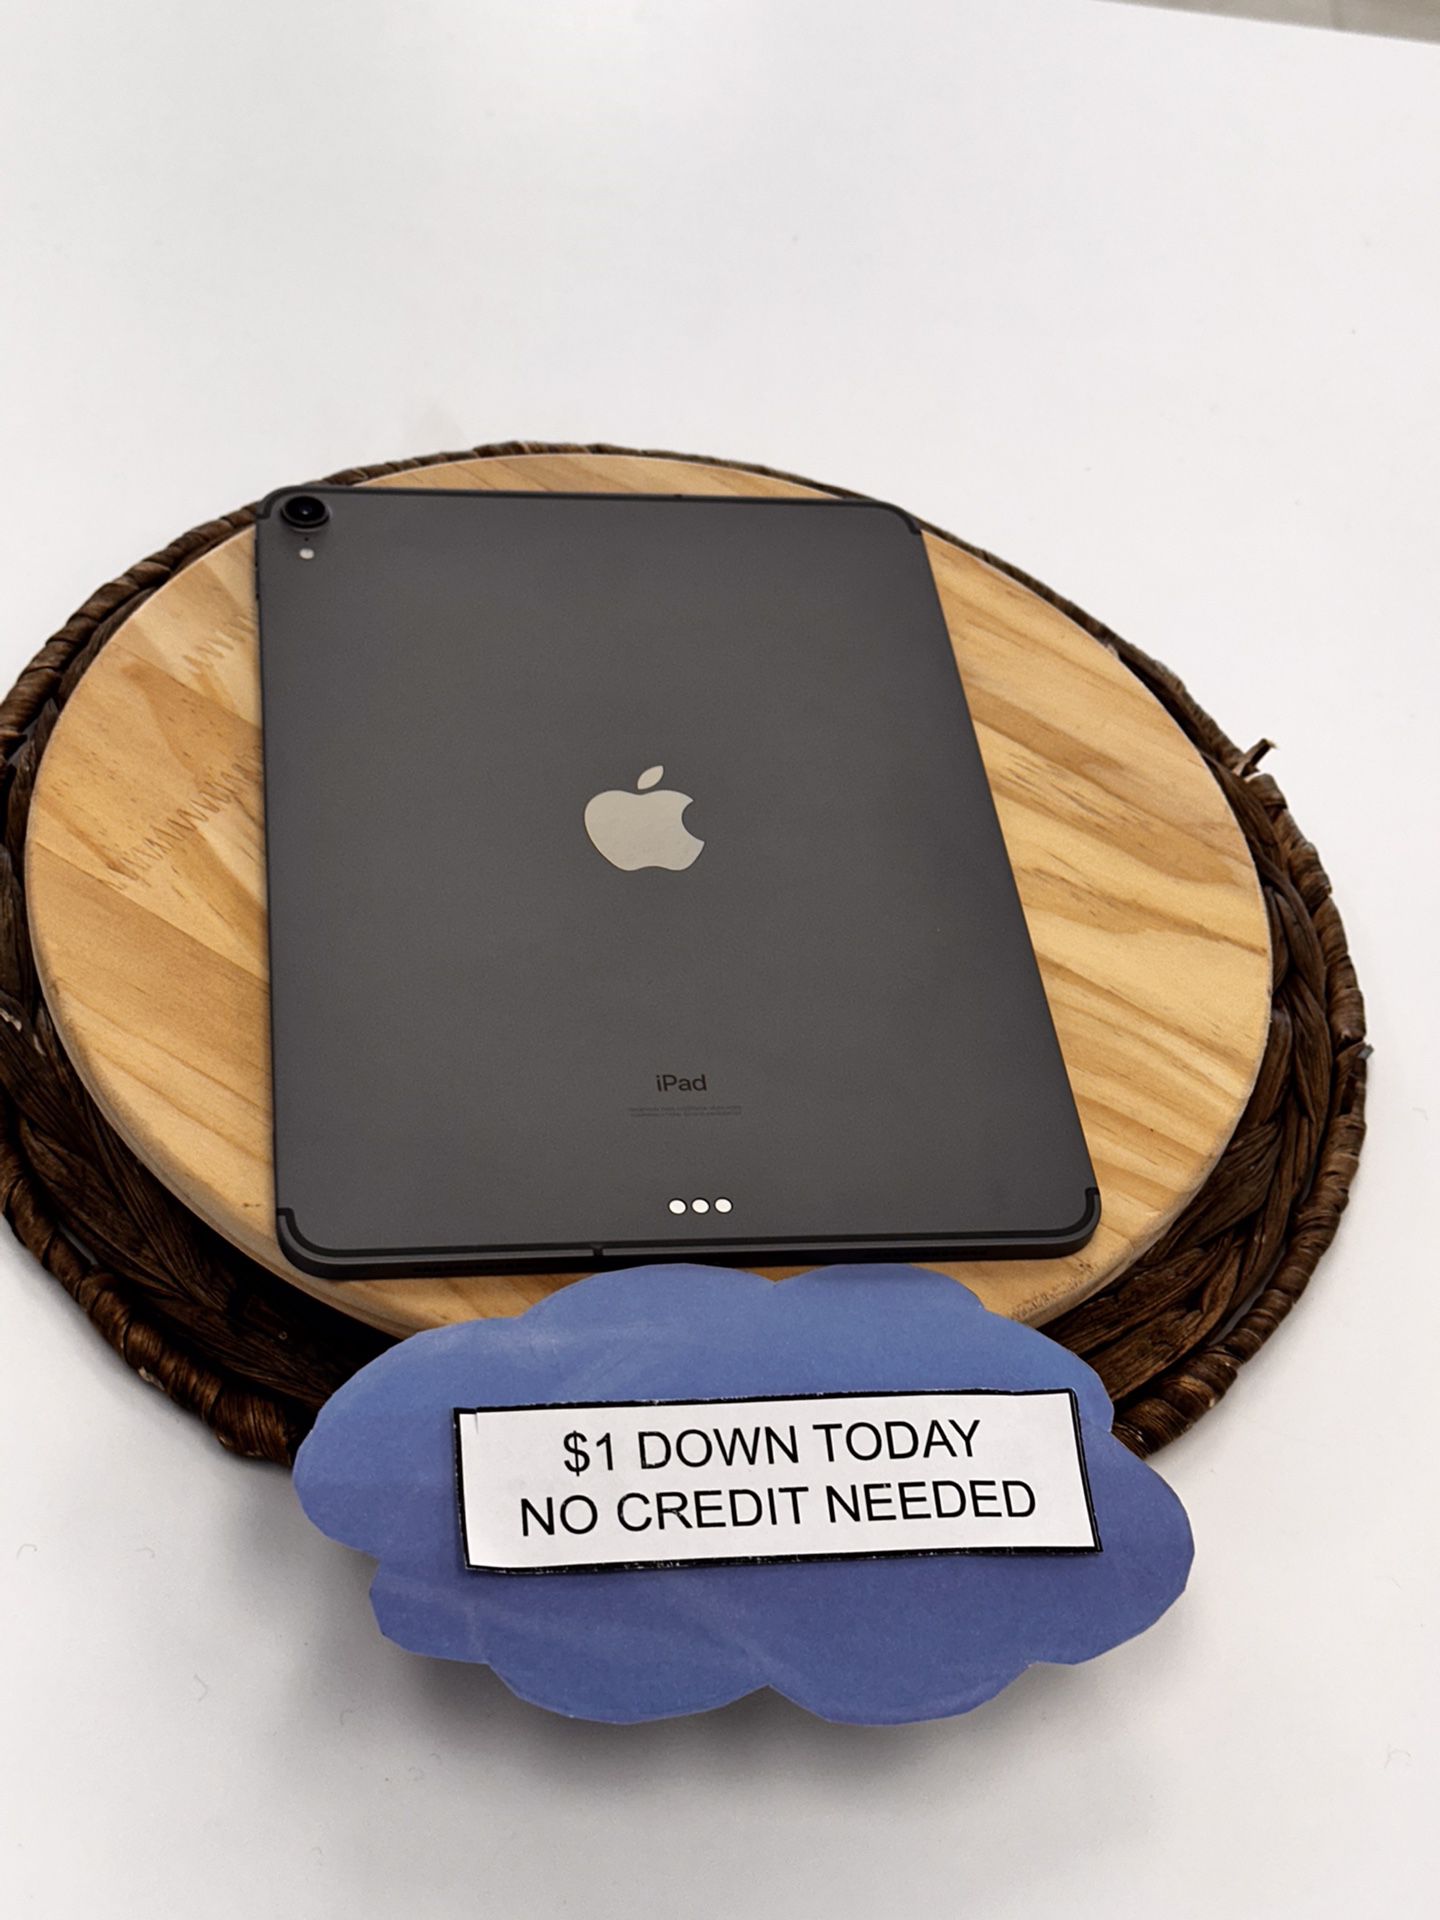 Apple IPAD Air 5th Gen Tablet - Pay $1 Today to Take it Home and Pay the Rest Later!